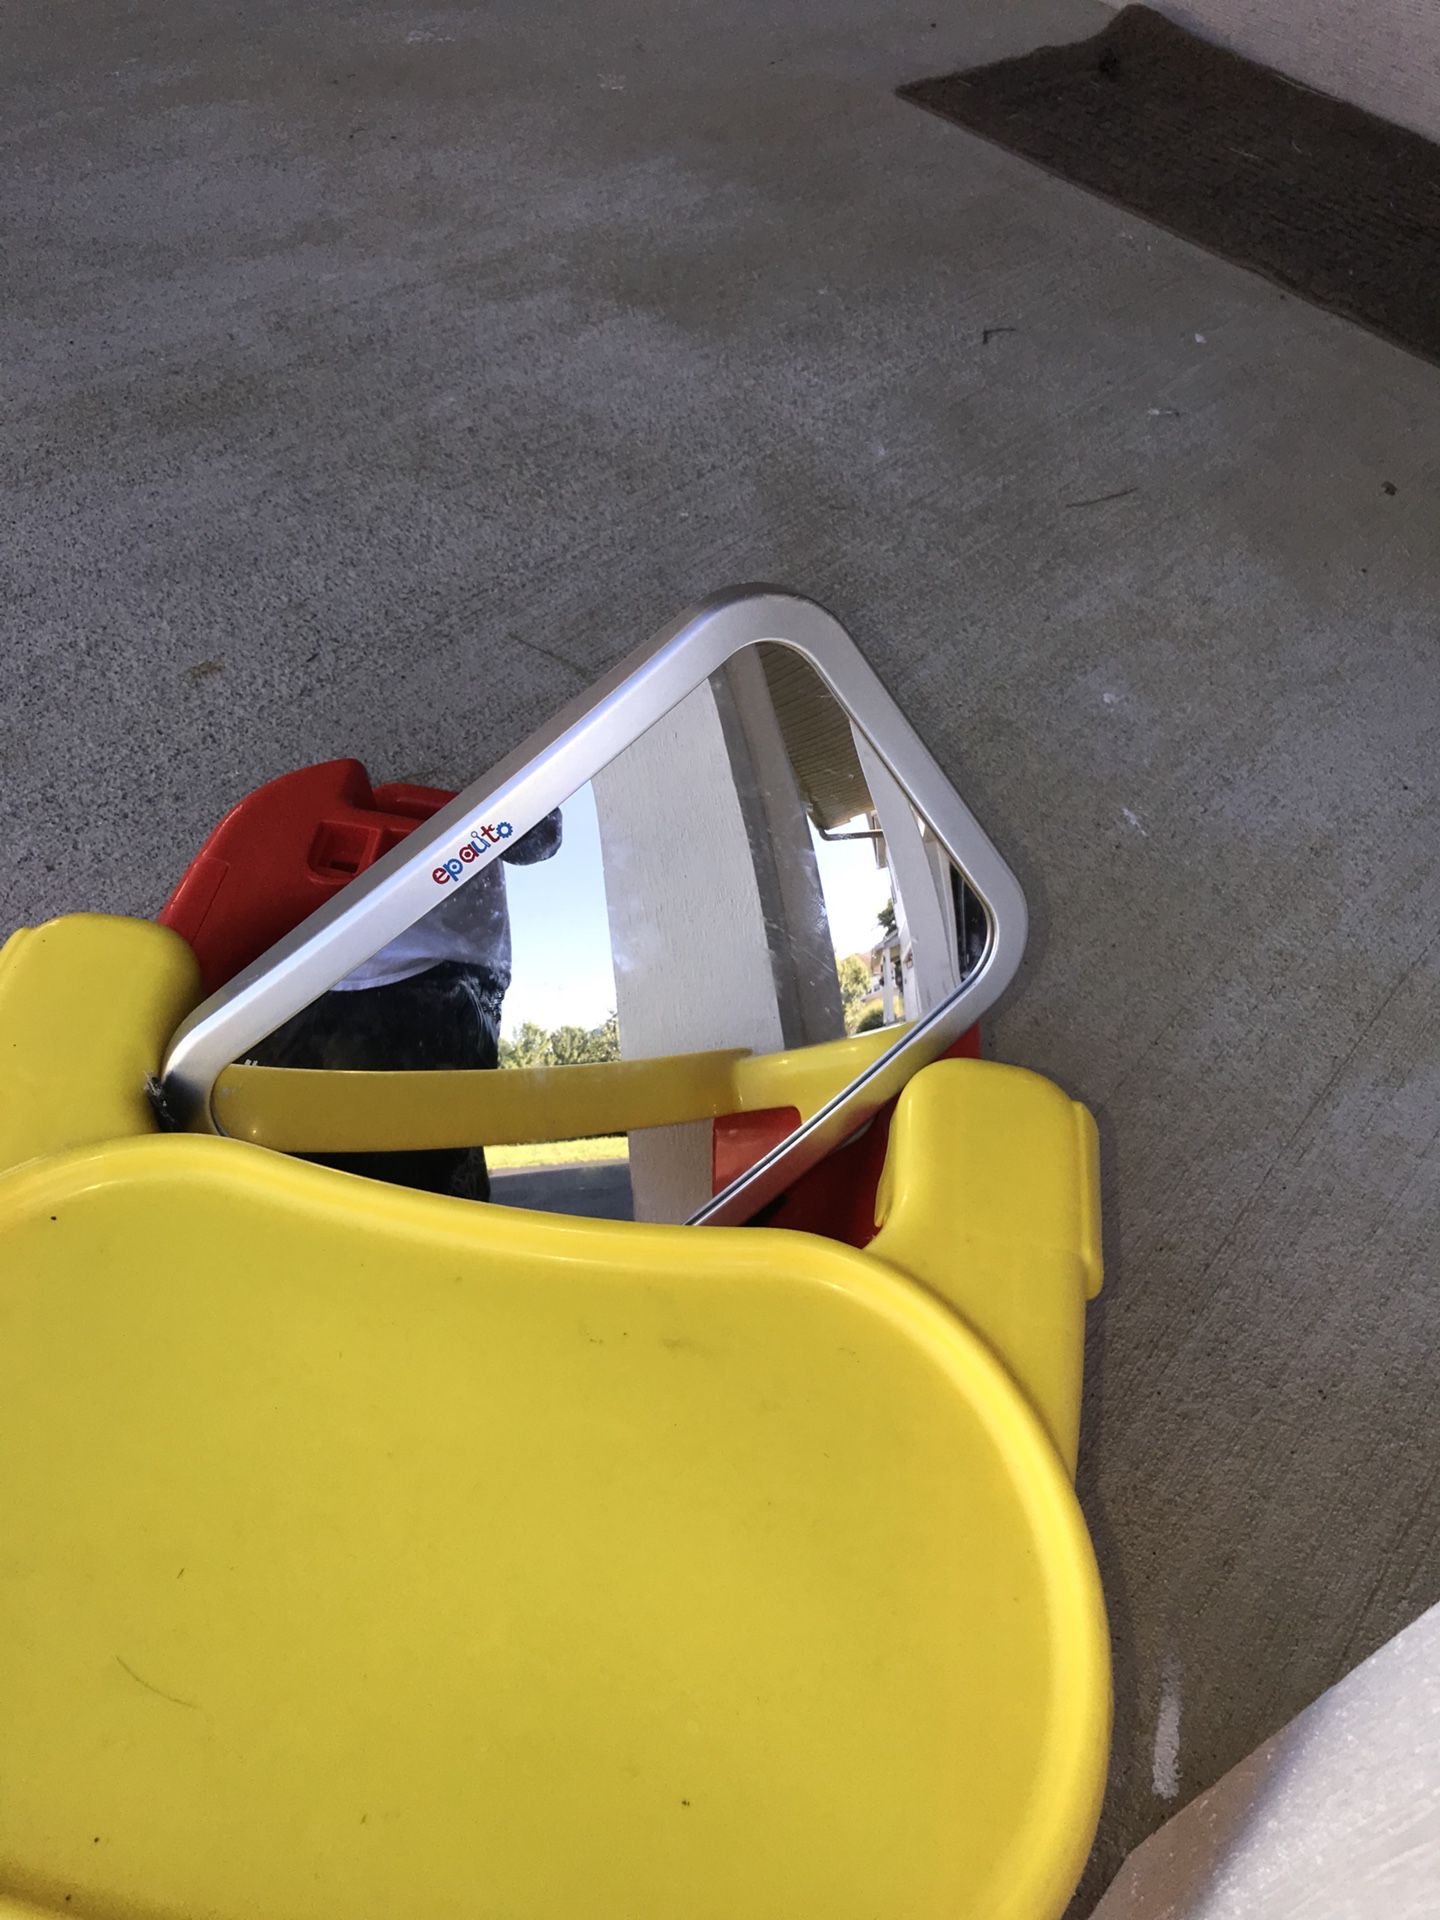 Kids Mickey Activity Chair and Infant Car mirror $20